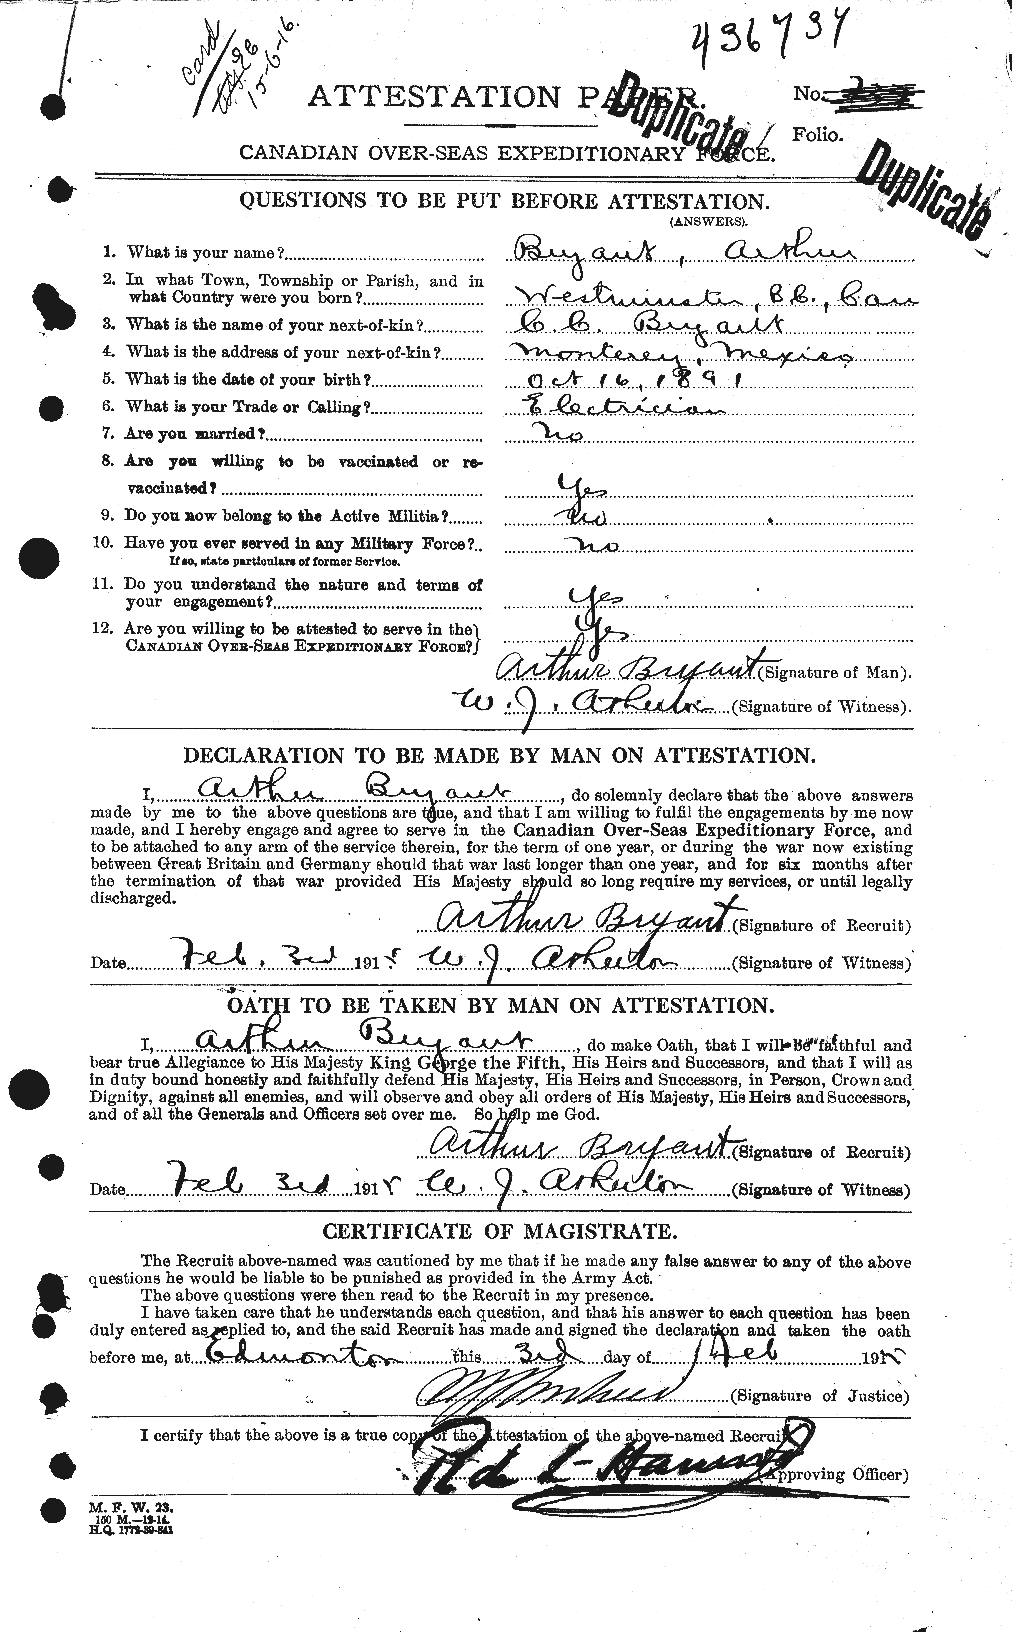 Personnel Records of the First World War - CEF 270792a